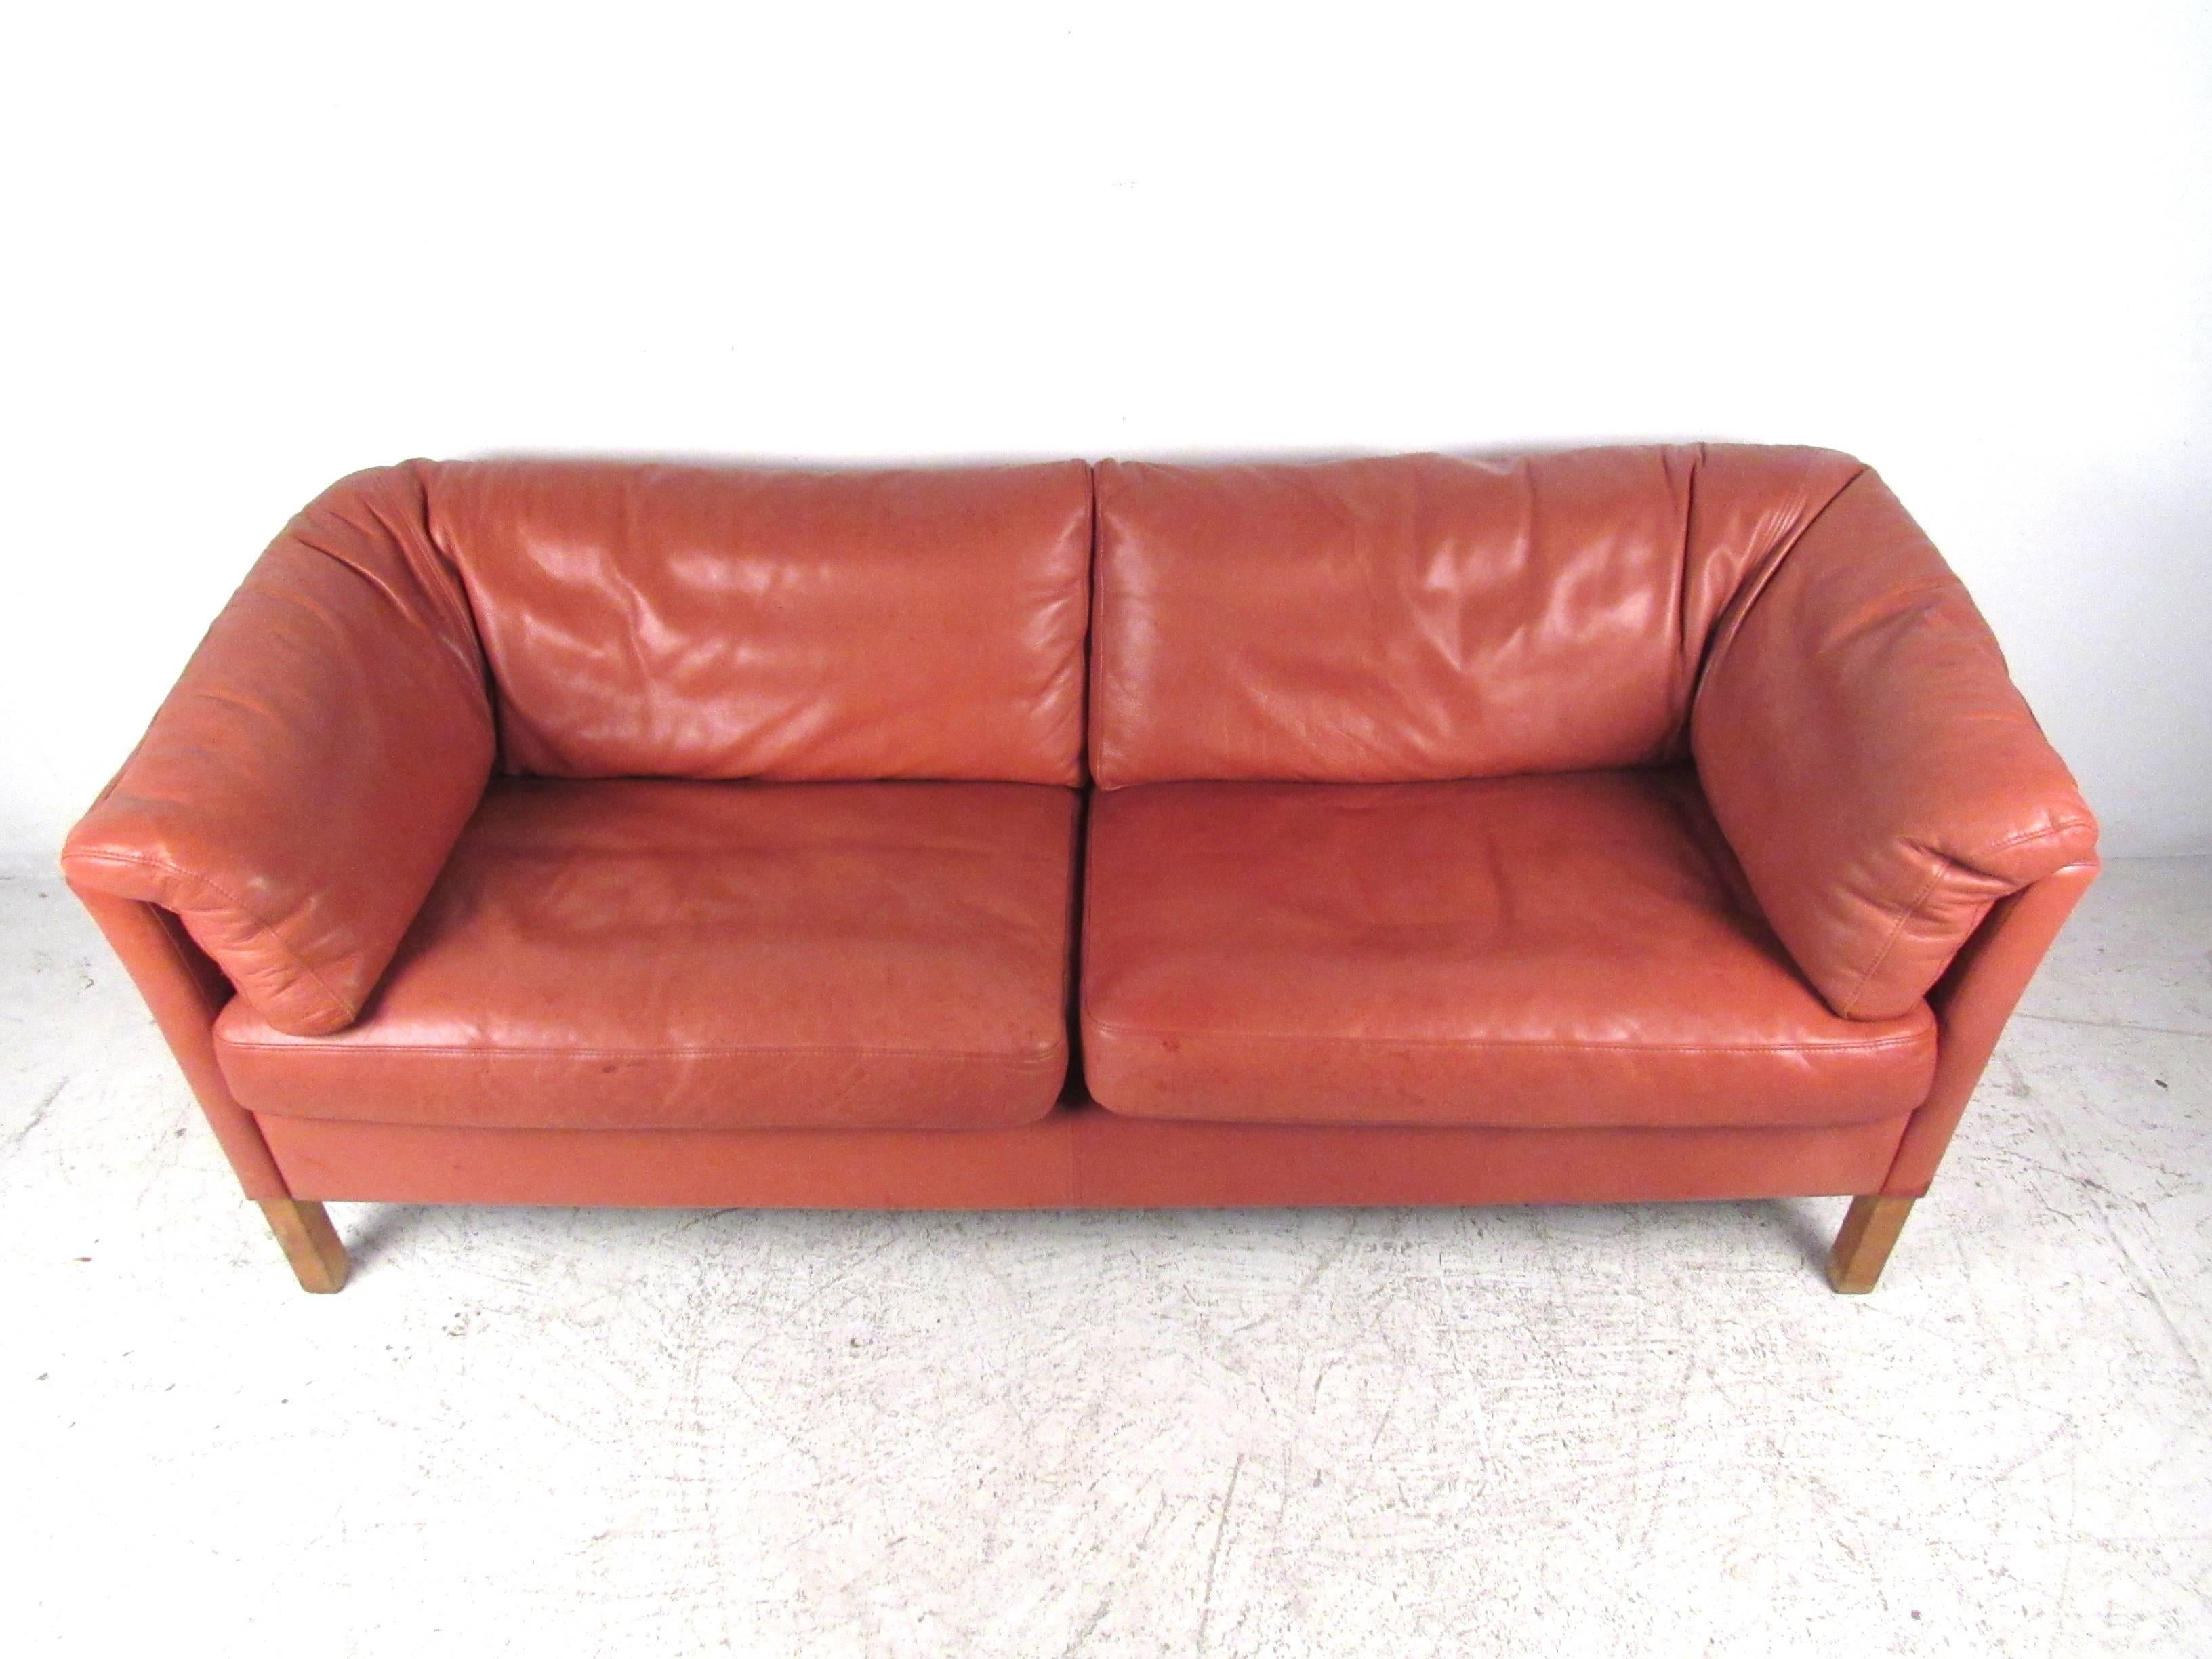 This beautiful pink leather love seat in the style of Borge Mogensen utilizes unique L-shaped back cushions for enhanced comfort and style. The versatile size of the piece makes this a great choice for an oversized love seat or a smaller sofa in a